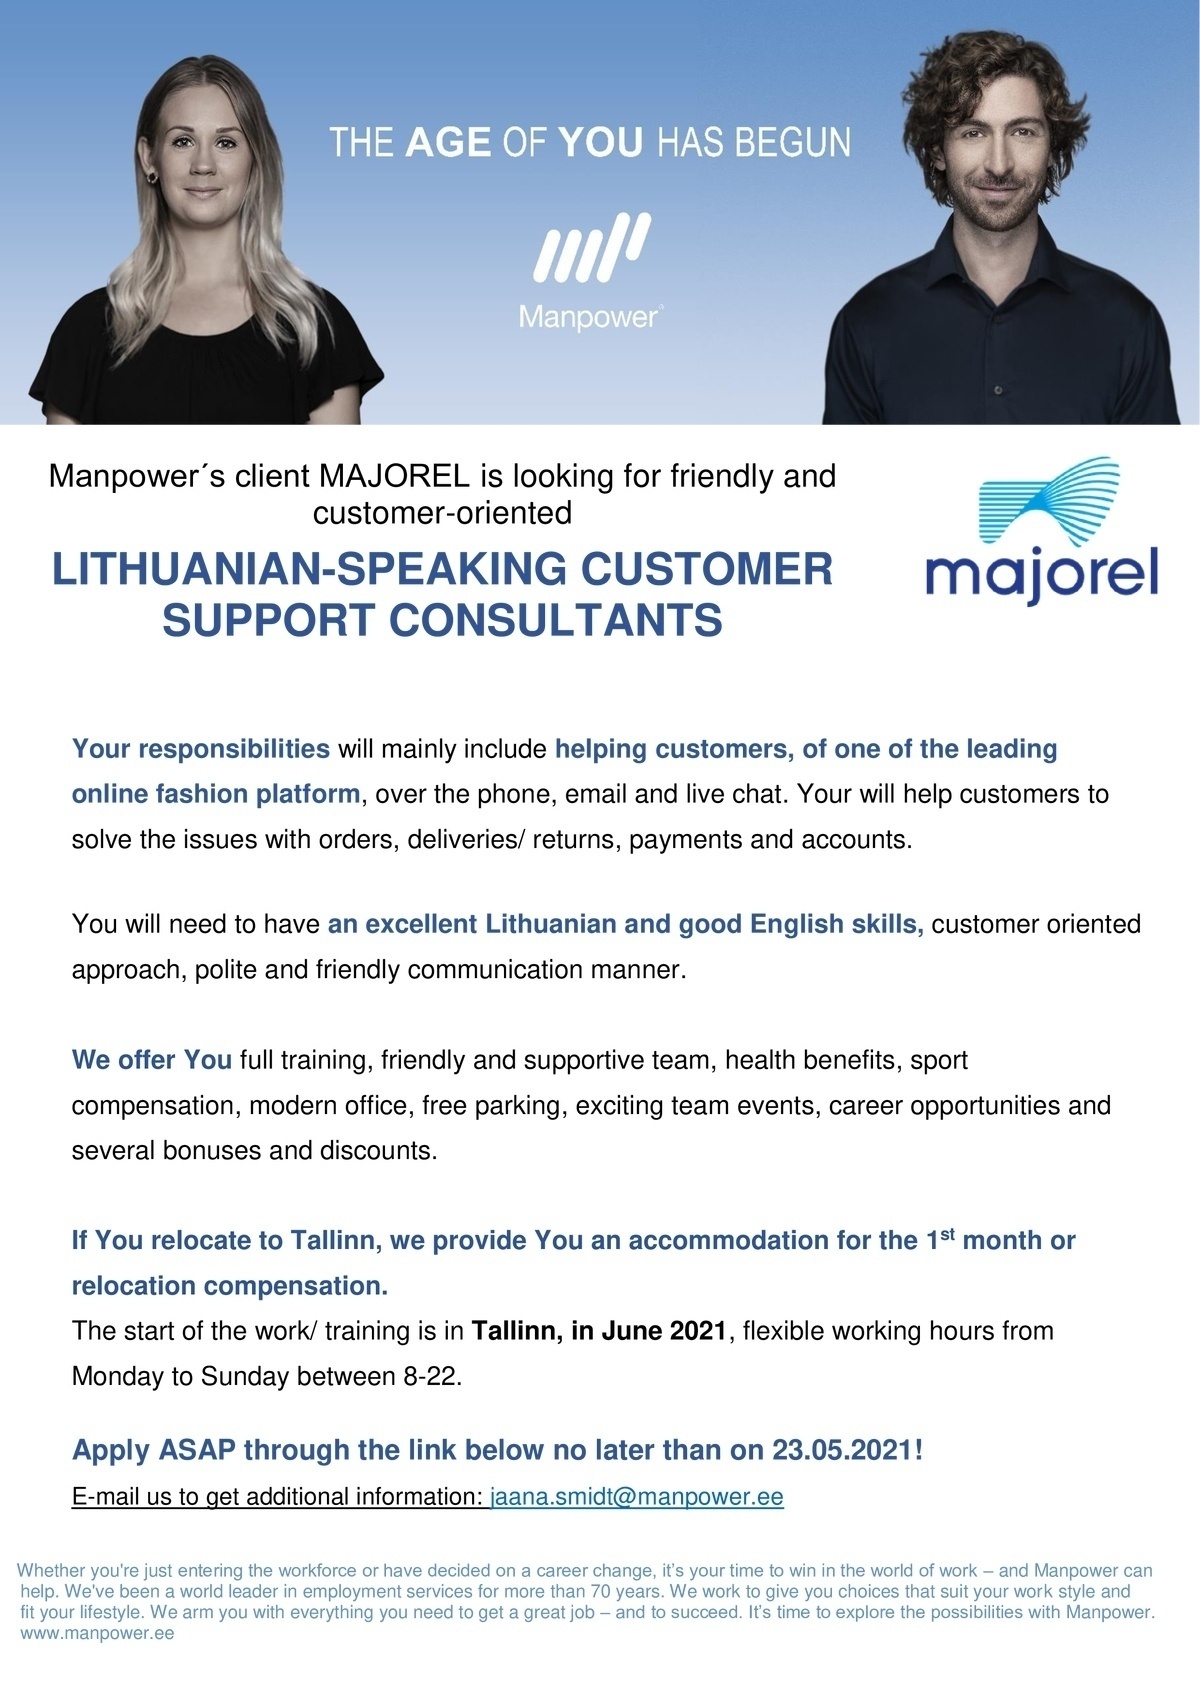 Manpower OÜ LITHUANIAN-SPEAKING CUSTOMER SUPPORT CONSULTANTS 